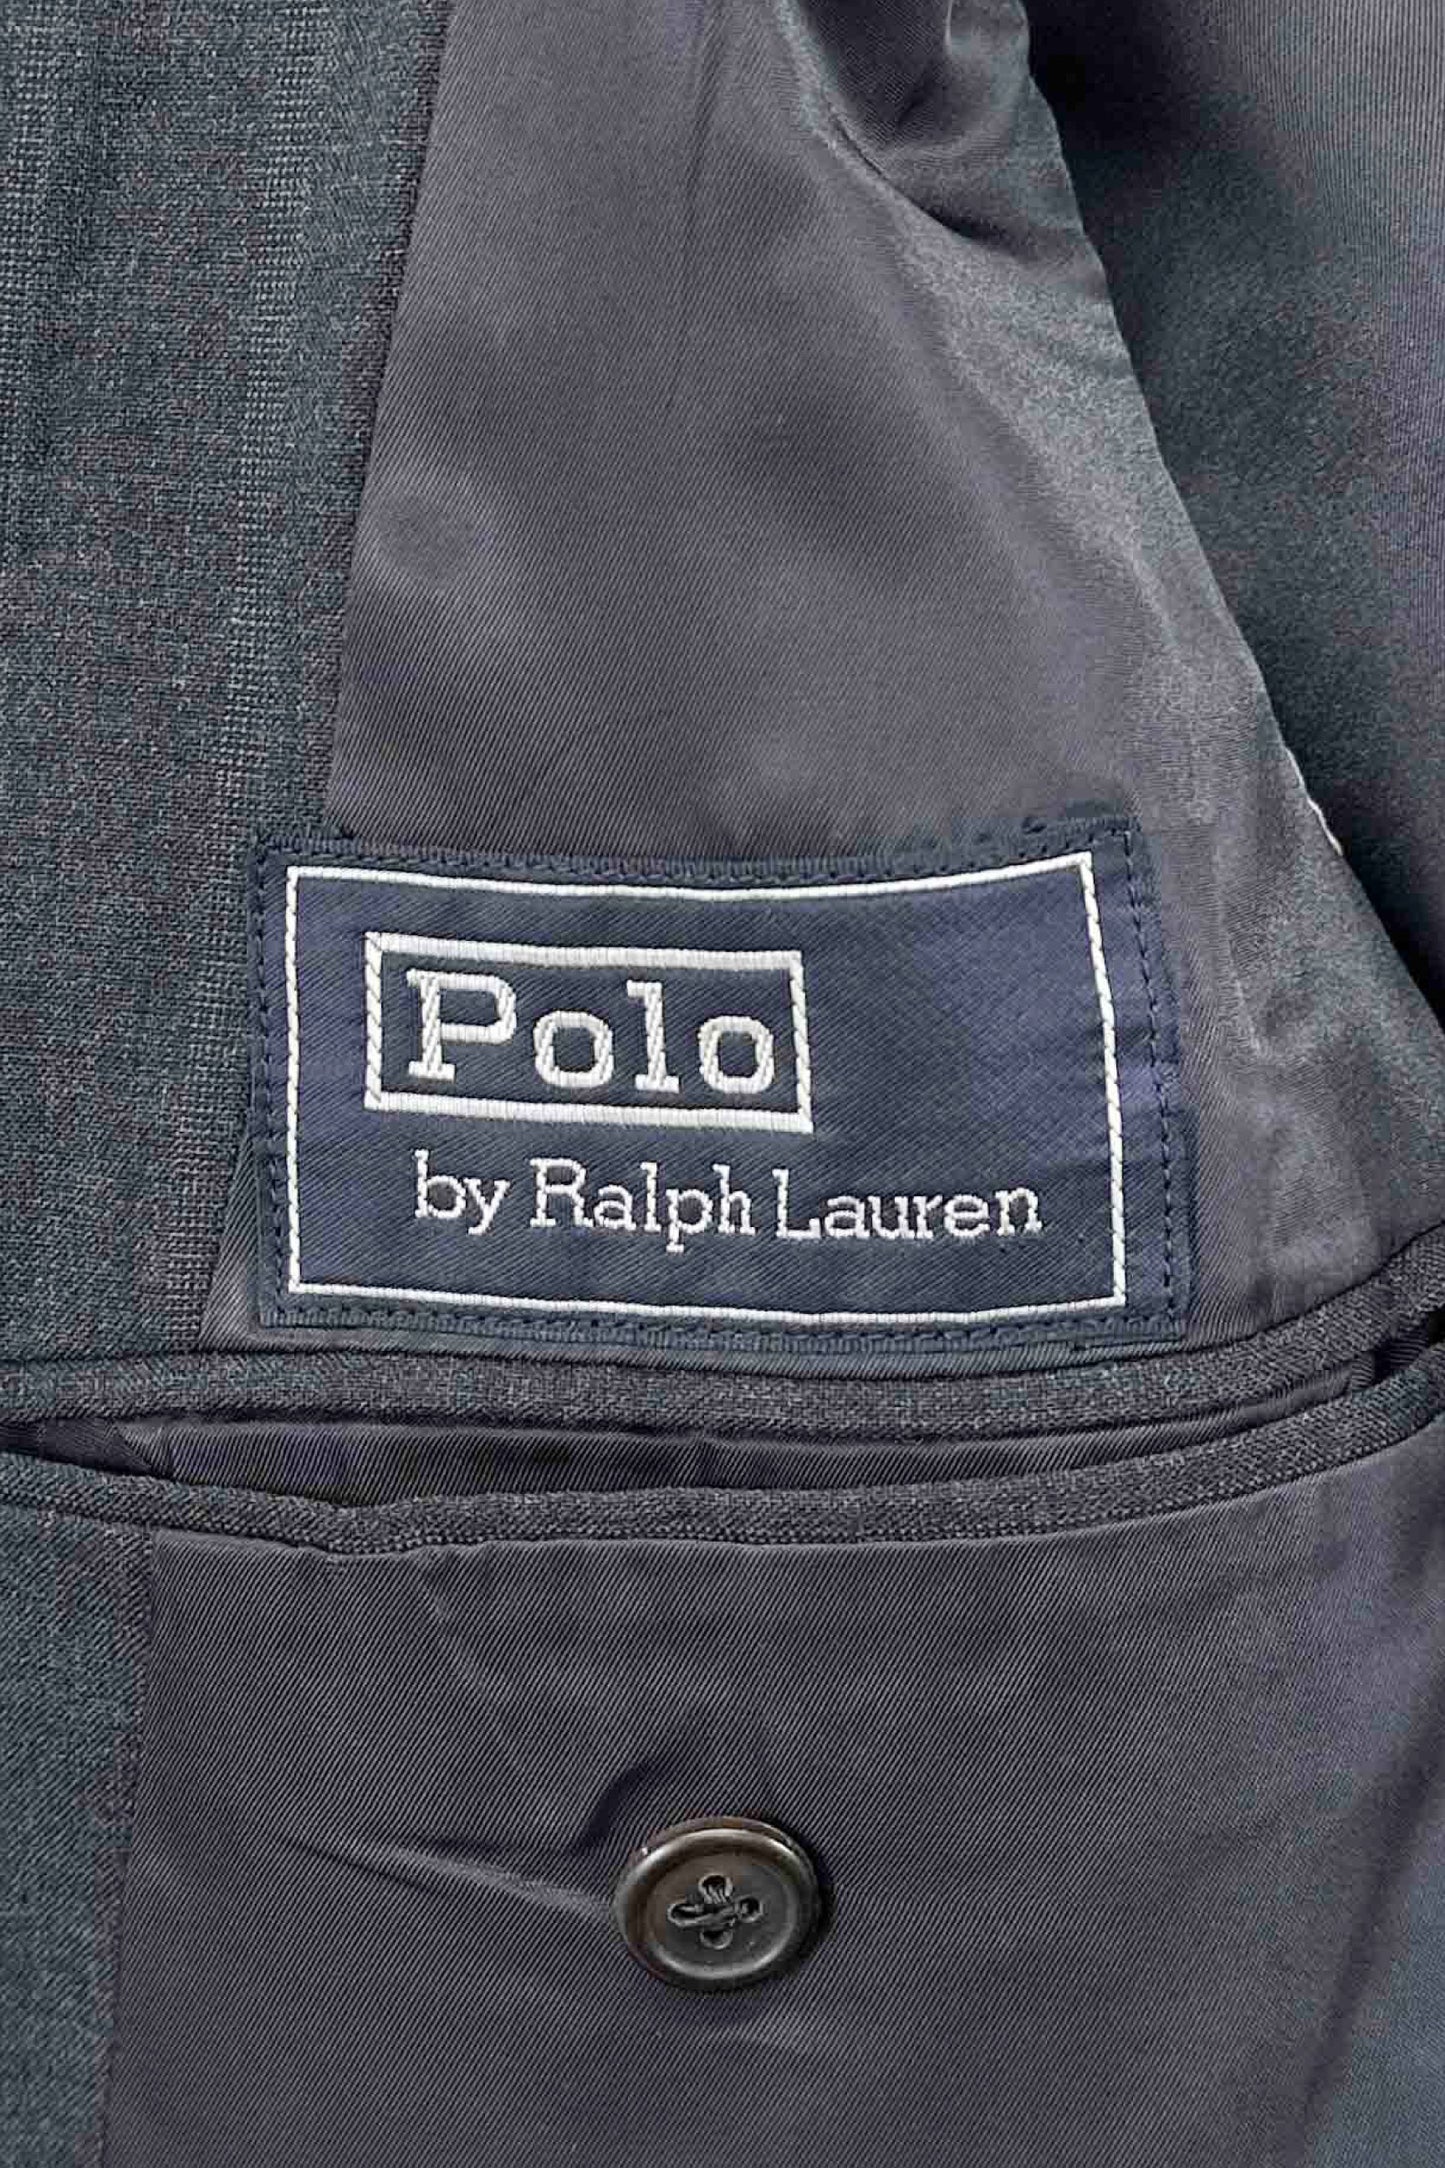 Polo by Ralph Lauren striped set up